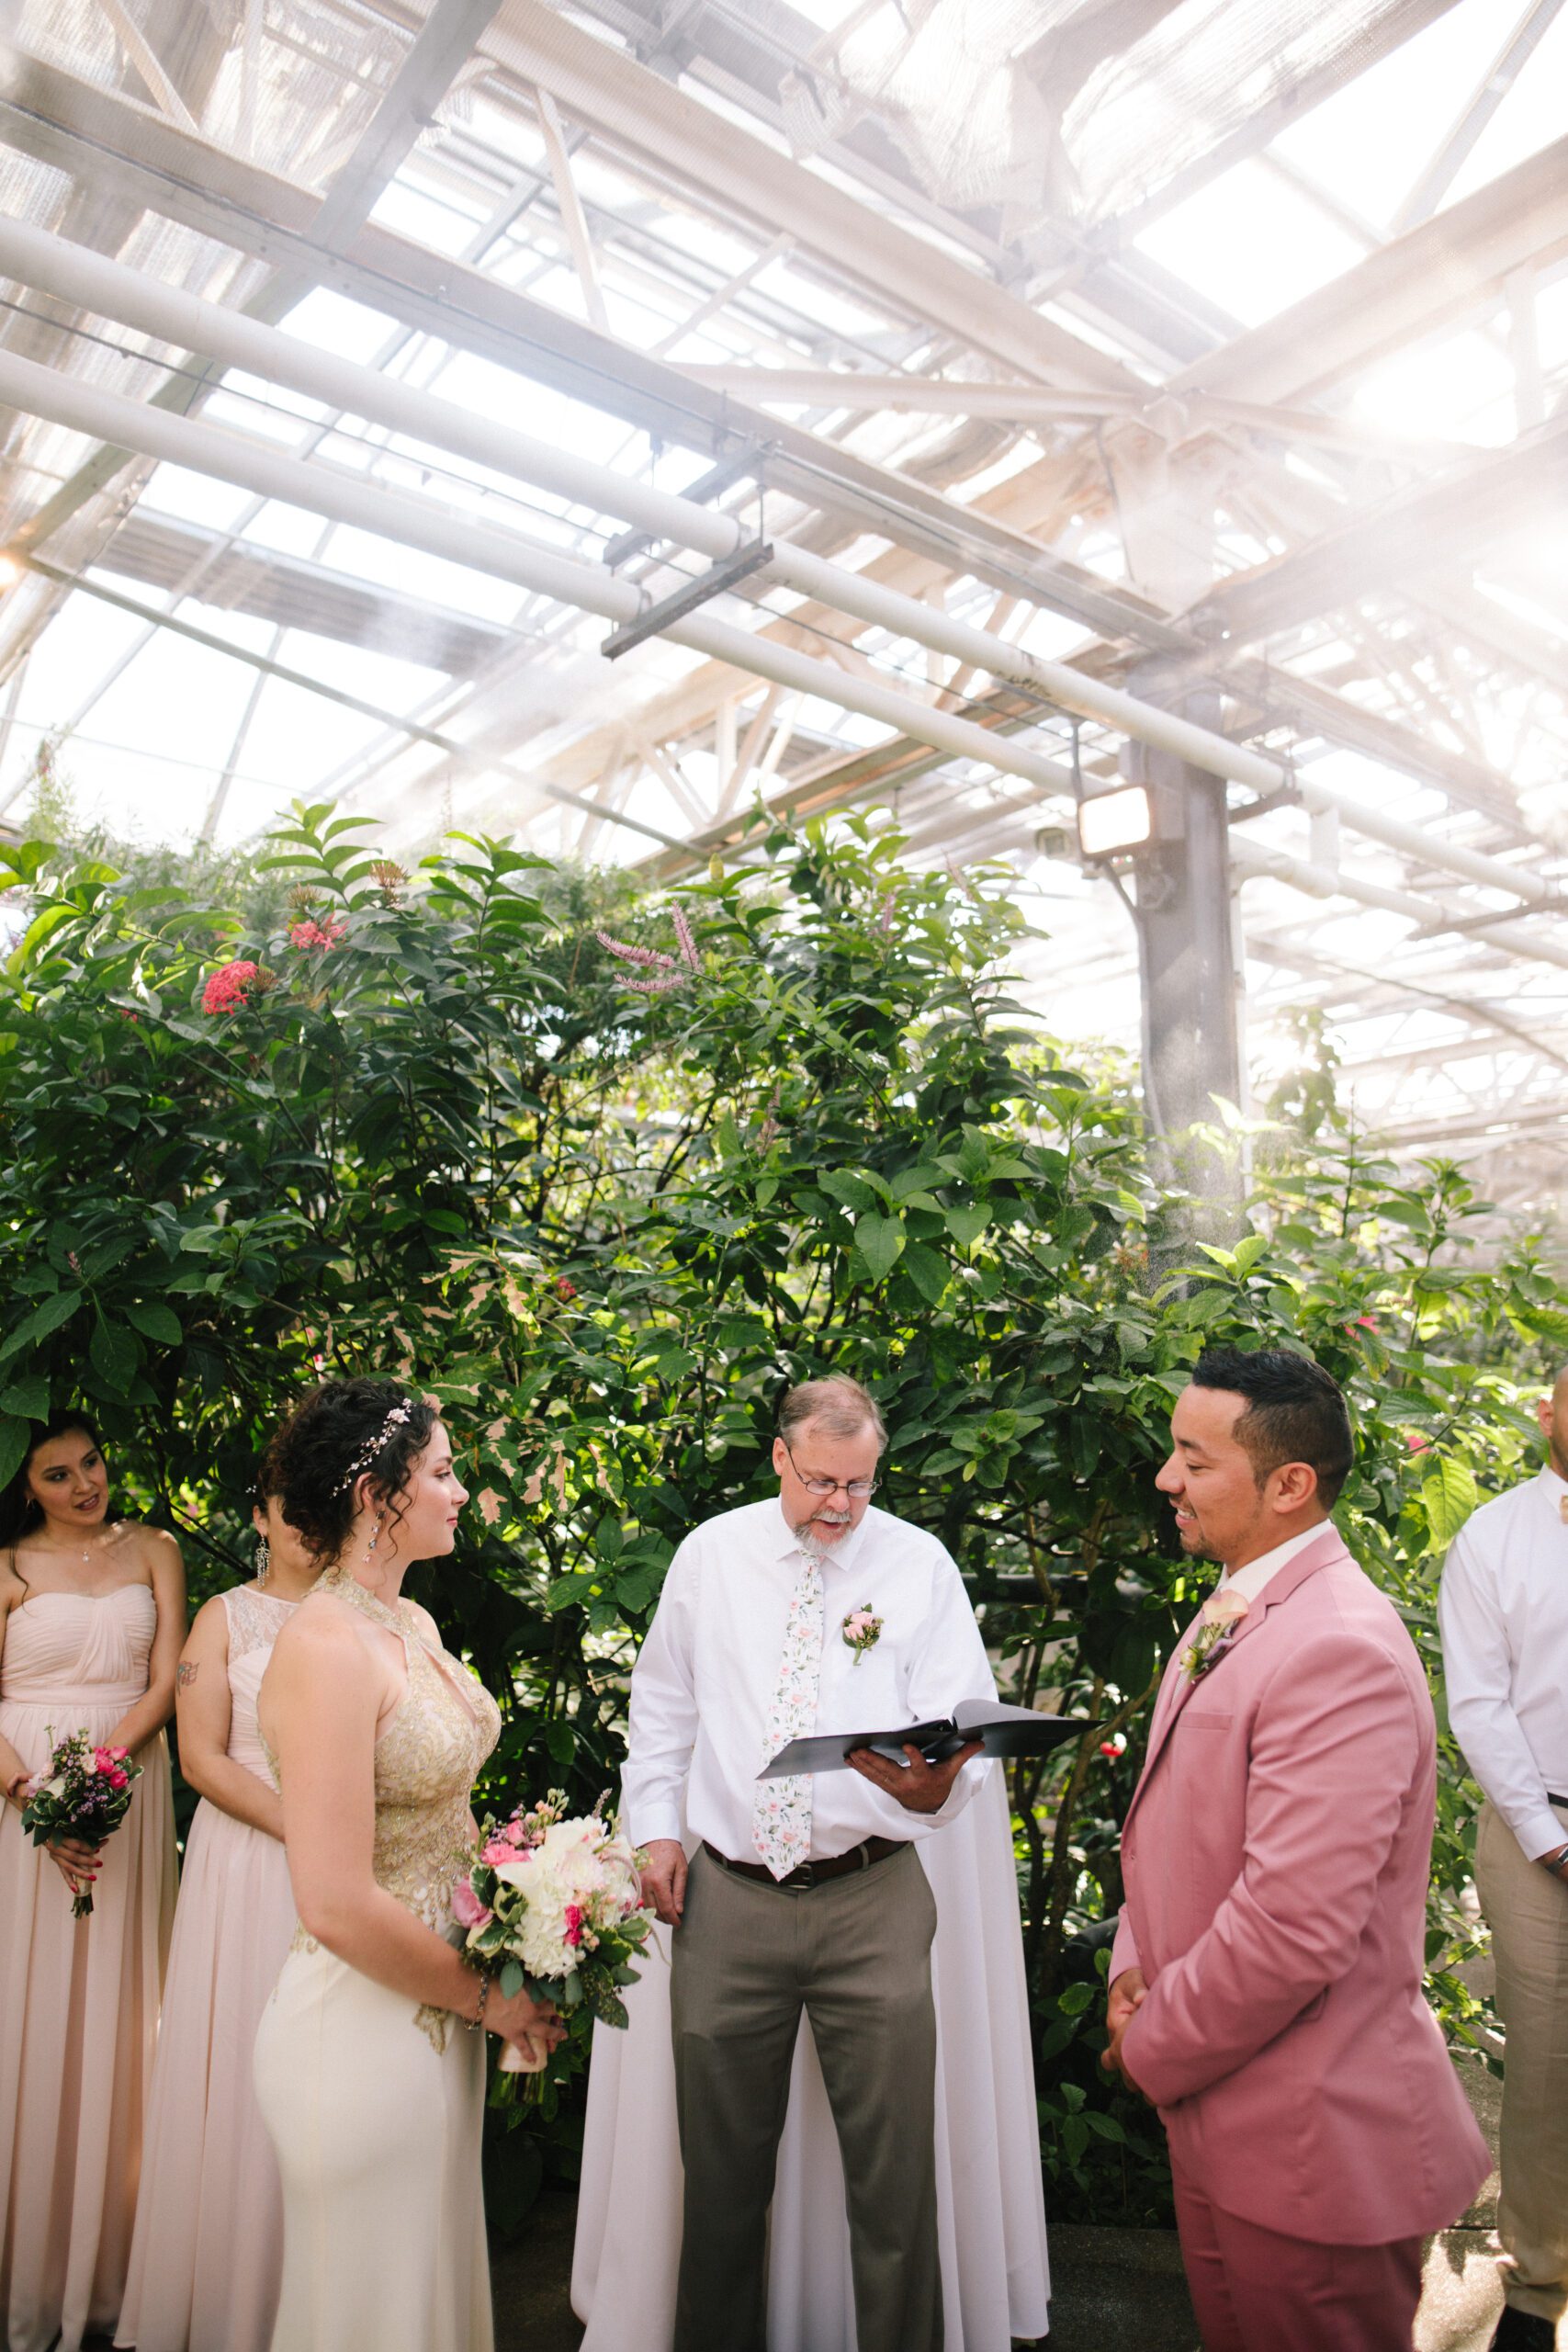 A shot of the bride and groom listening to the officint during their Butterfly Pavilion wedding.